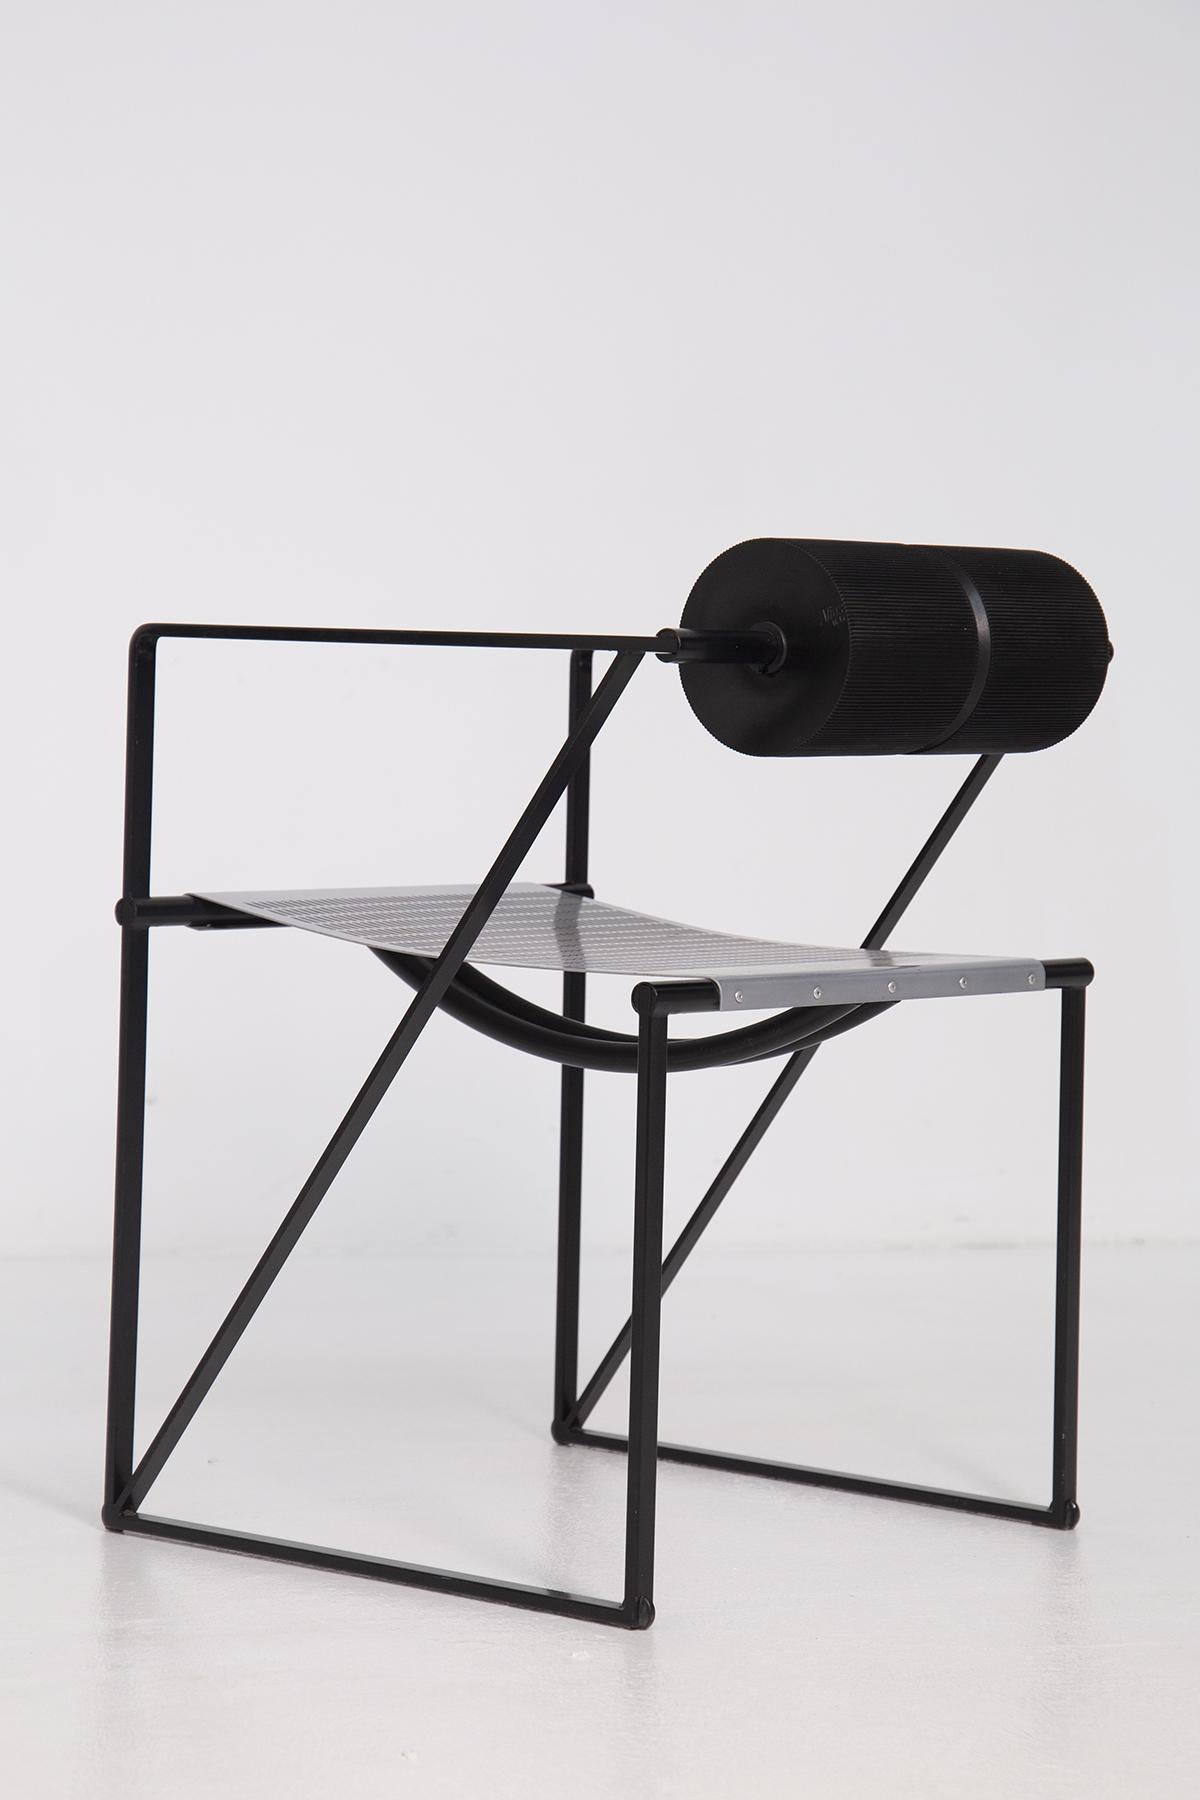 Pair of Chairs Seconda 602 by Mario Botta for Alias 1982s by Botta Collection 12